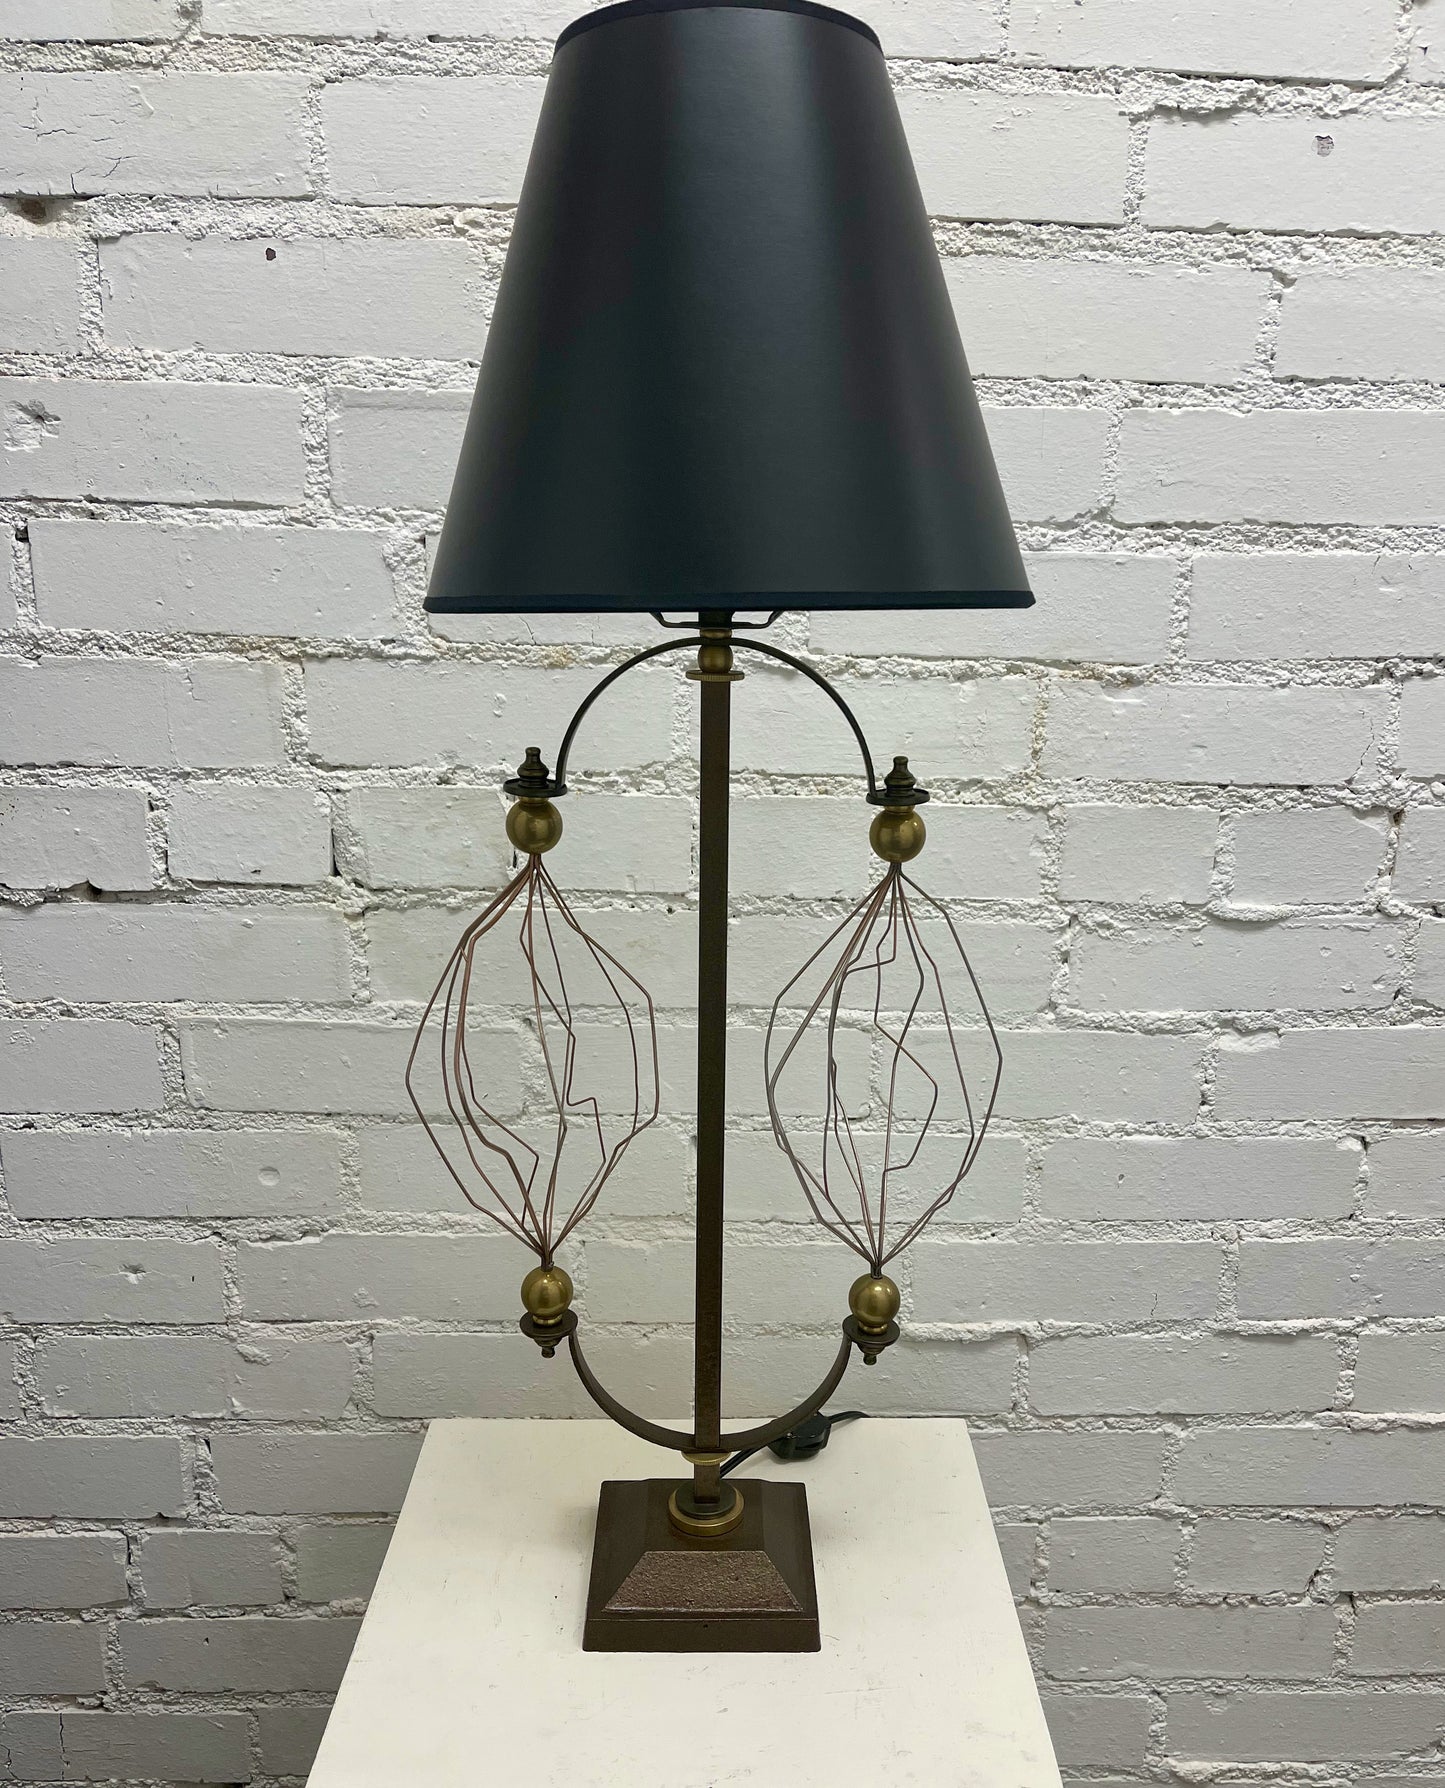 “Tesla” Inspired Vertical Table Lamp with Black Shade